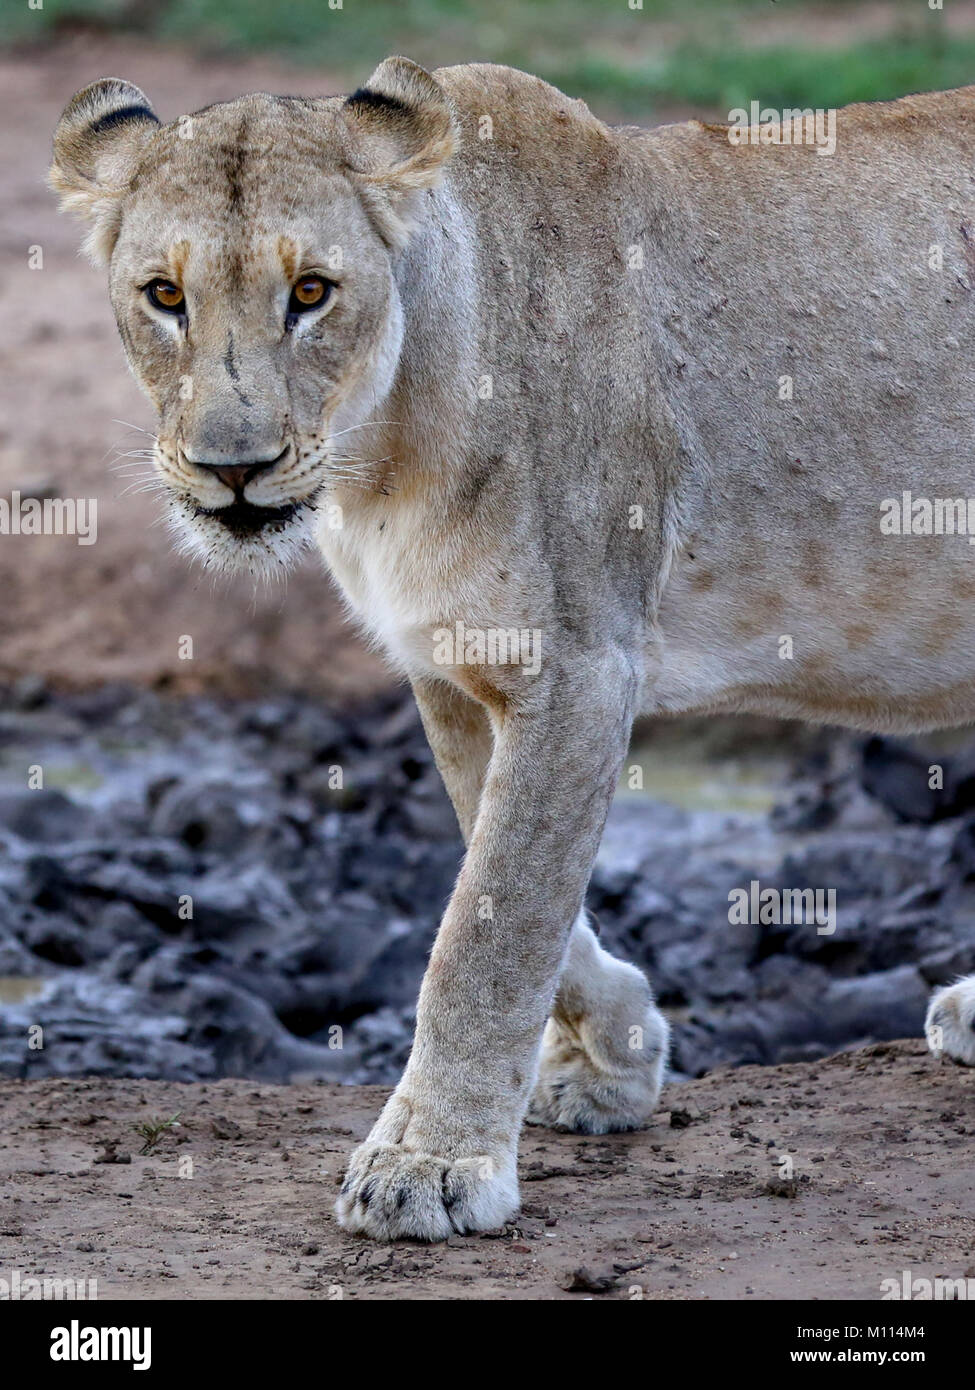 Adult lioness portrait prowling around dried up muddy watering hole Stock Photo